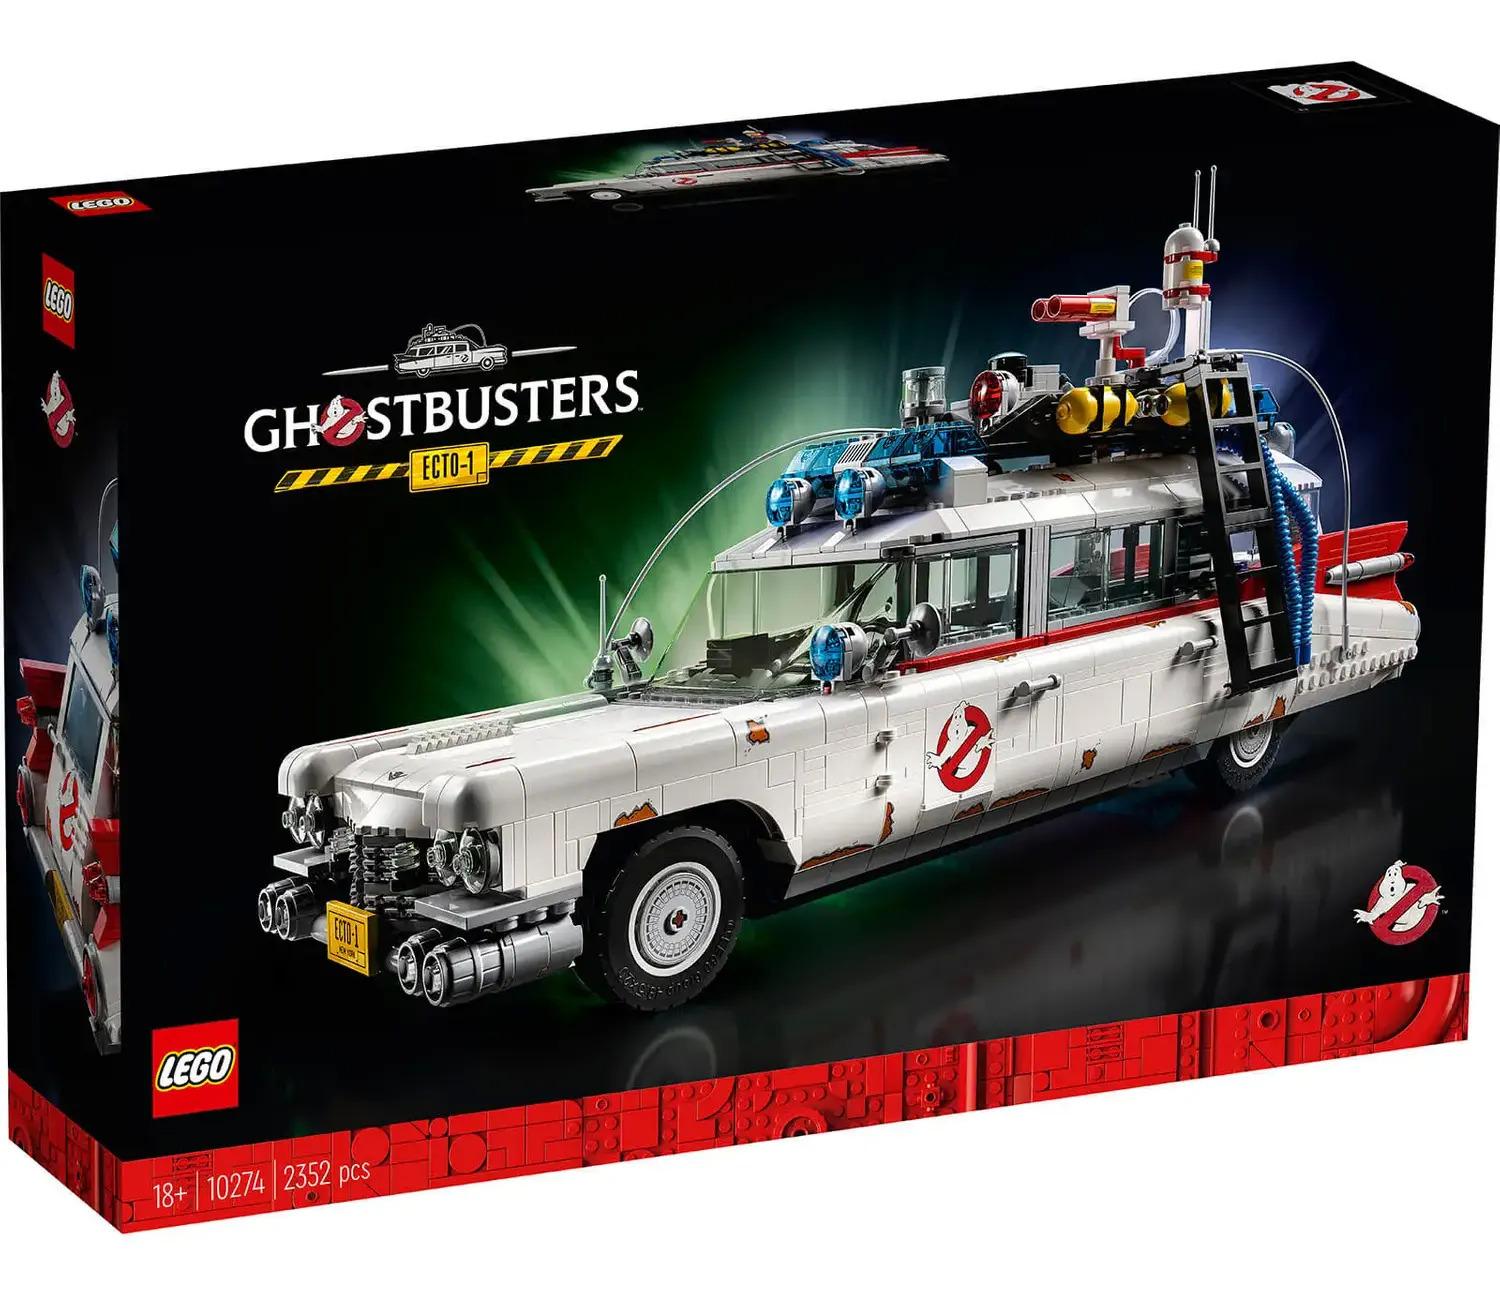 LEGO Creator Expert Ghostbusters ECTO-1 Building Kit for $168.99 Shipped